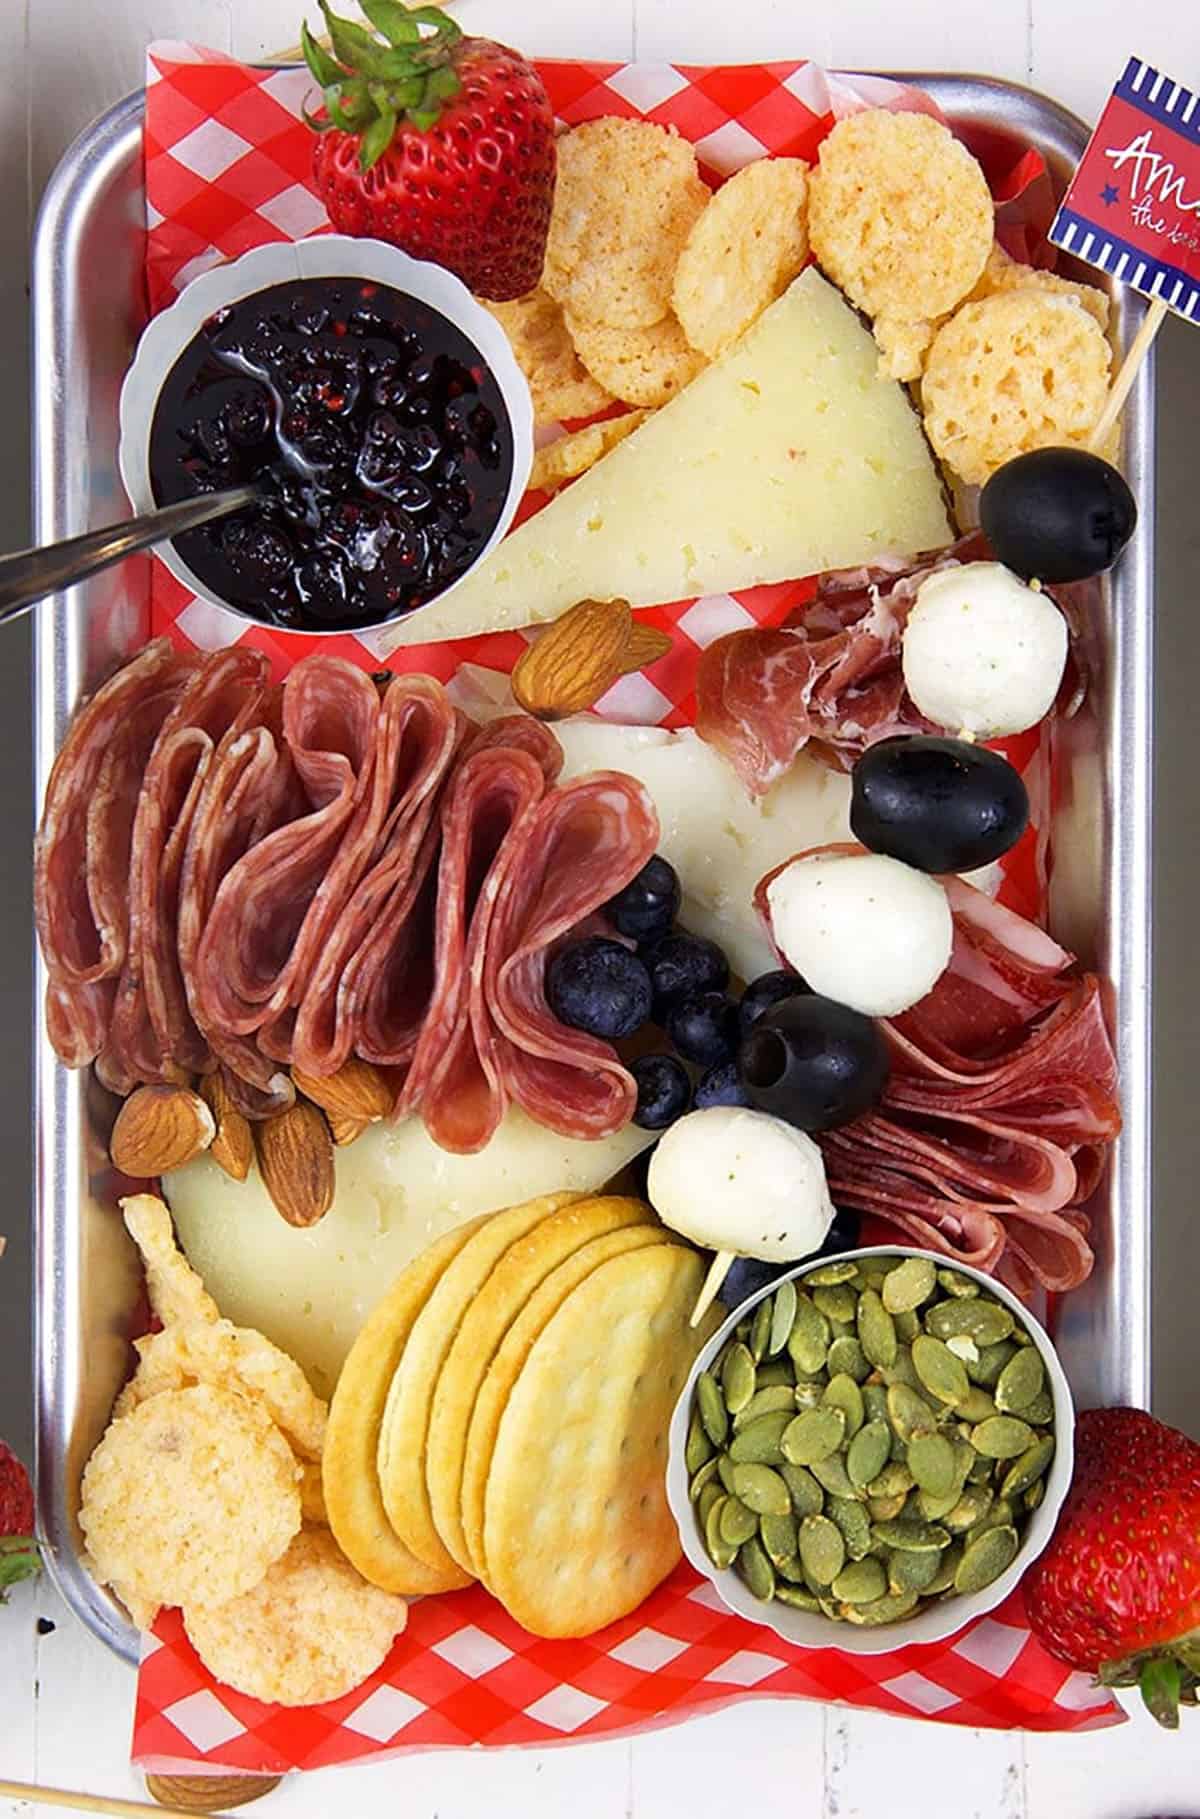 Overhead shot of charcuterie items on a stainless steel board with a red and white paper under the cheese.